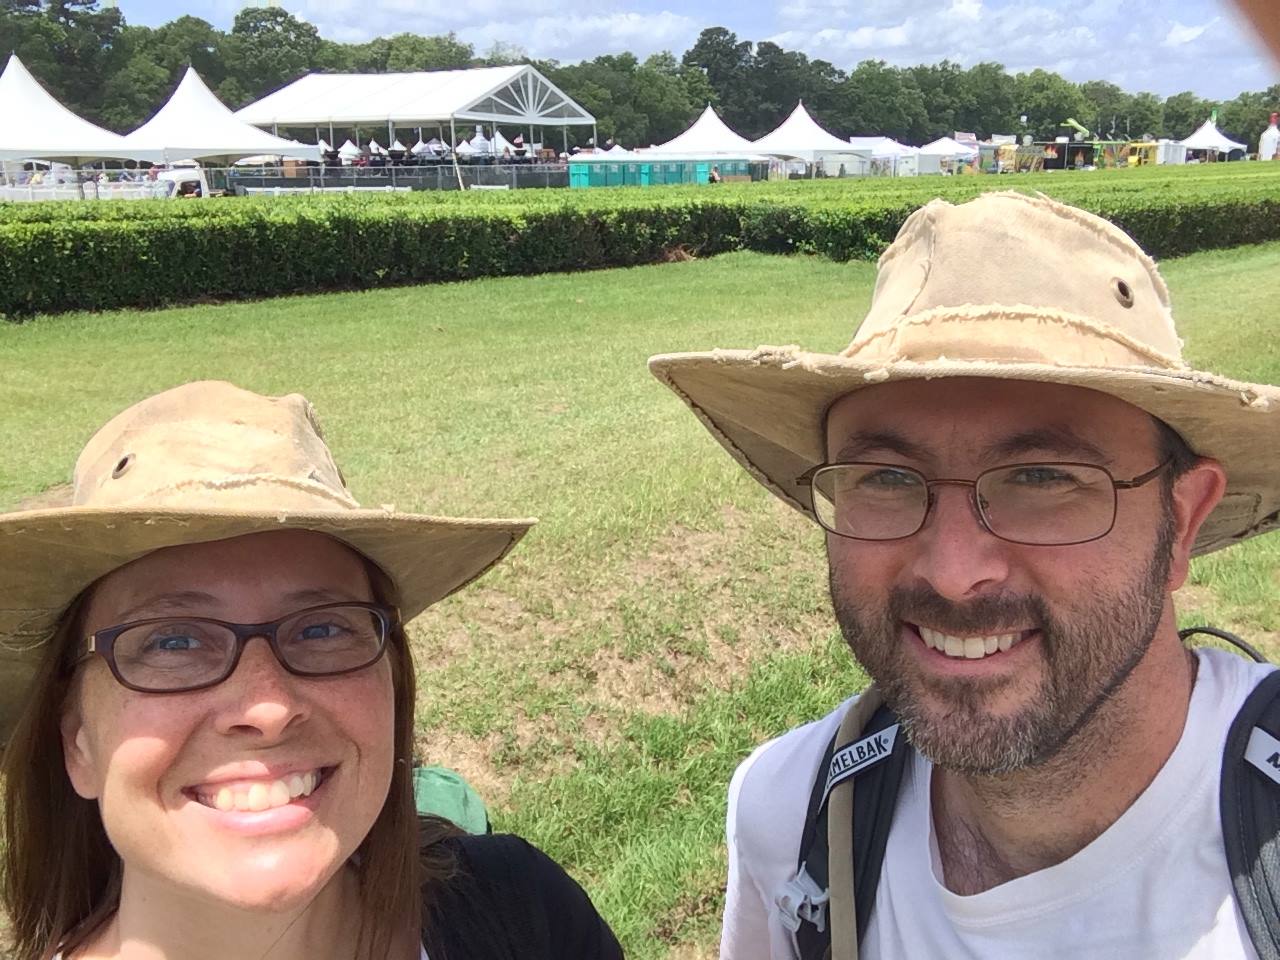 How This Couple Started an American Tea Company On Their Rural Land